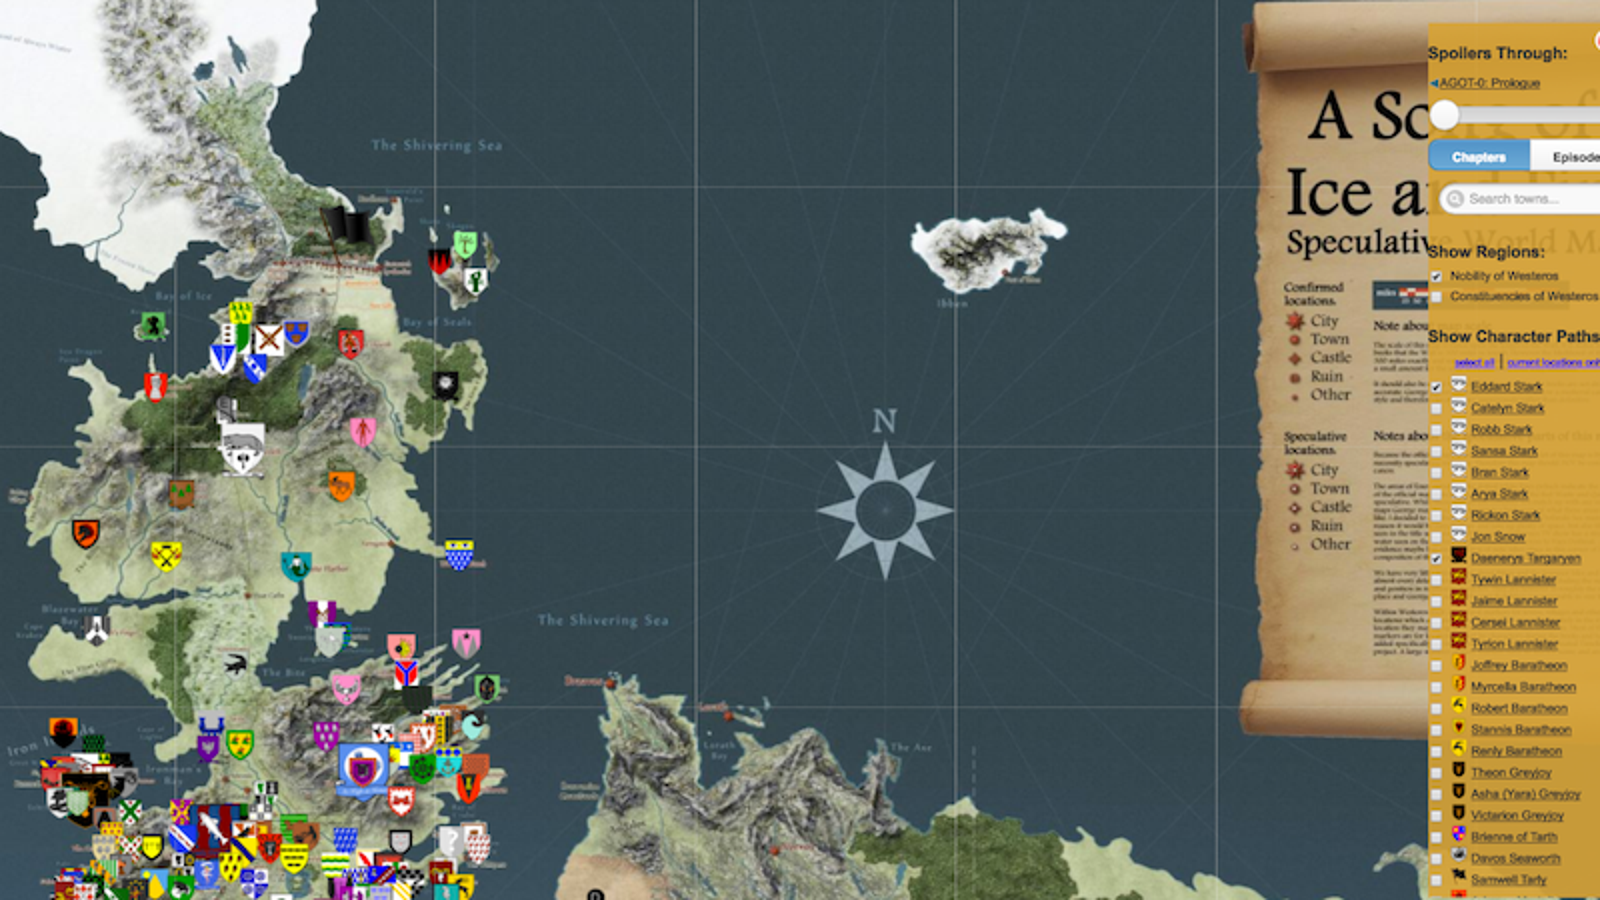 Get Your Game Of Thrones Fix With This Interactive Spoiler